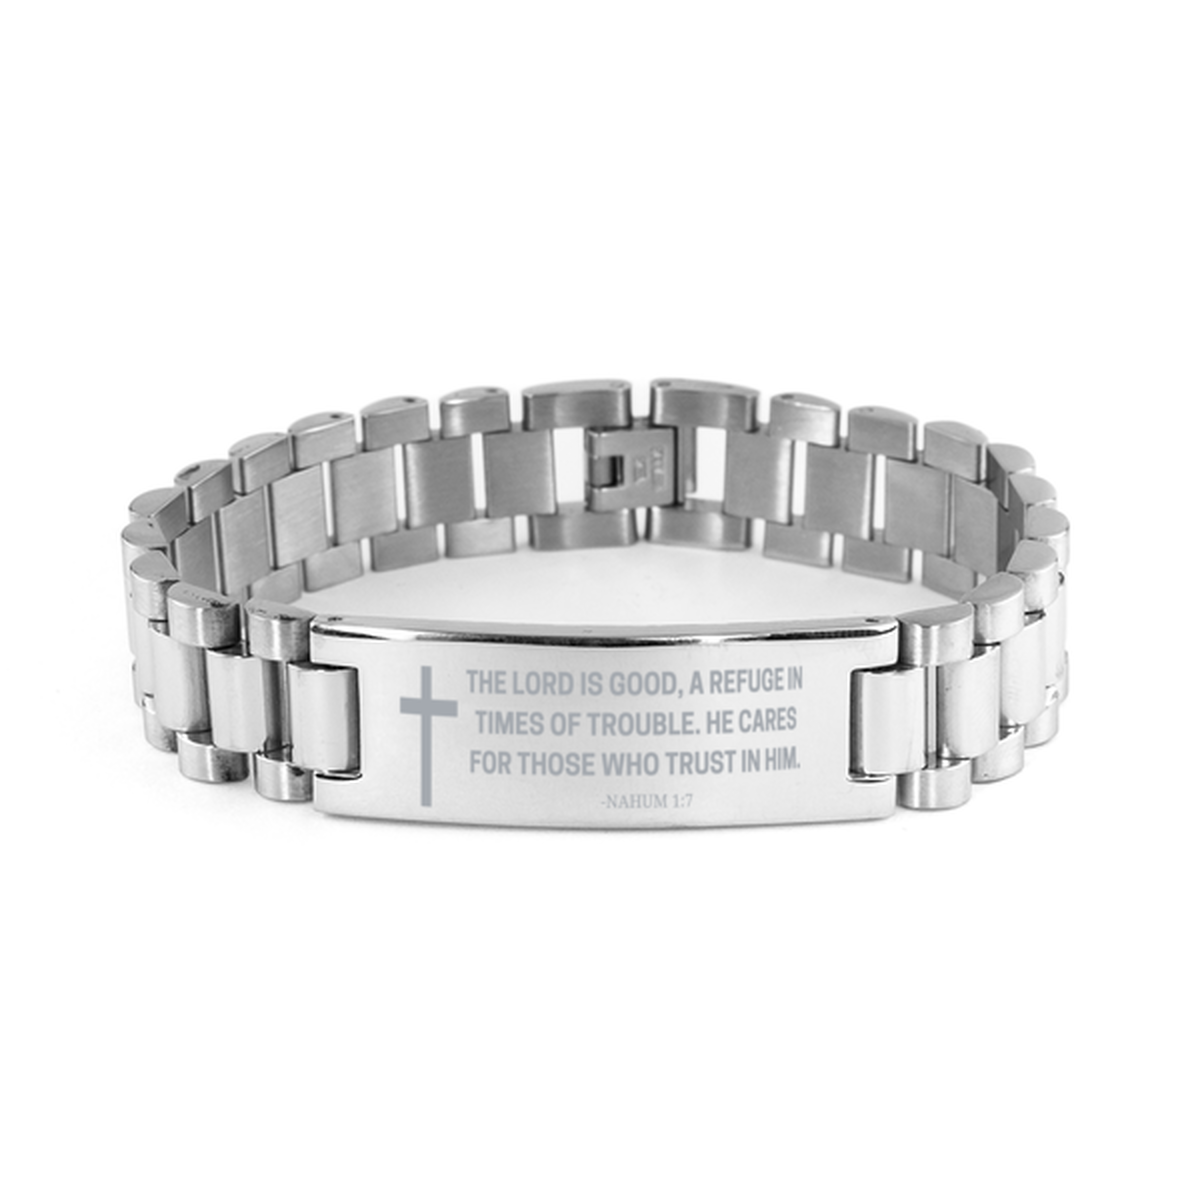 Baptism Gifts For Teenage Boys Girls, Christian Bible Verse Ladder Stainless Steel Bracelet, The Lord is good, Catholic Confirmation Gifts for Son, Godson, Grandson, Nephew